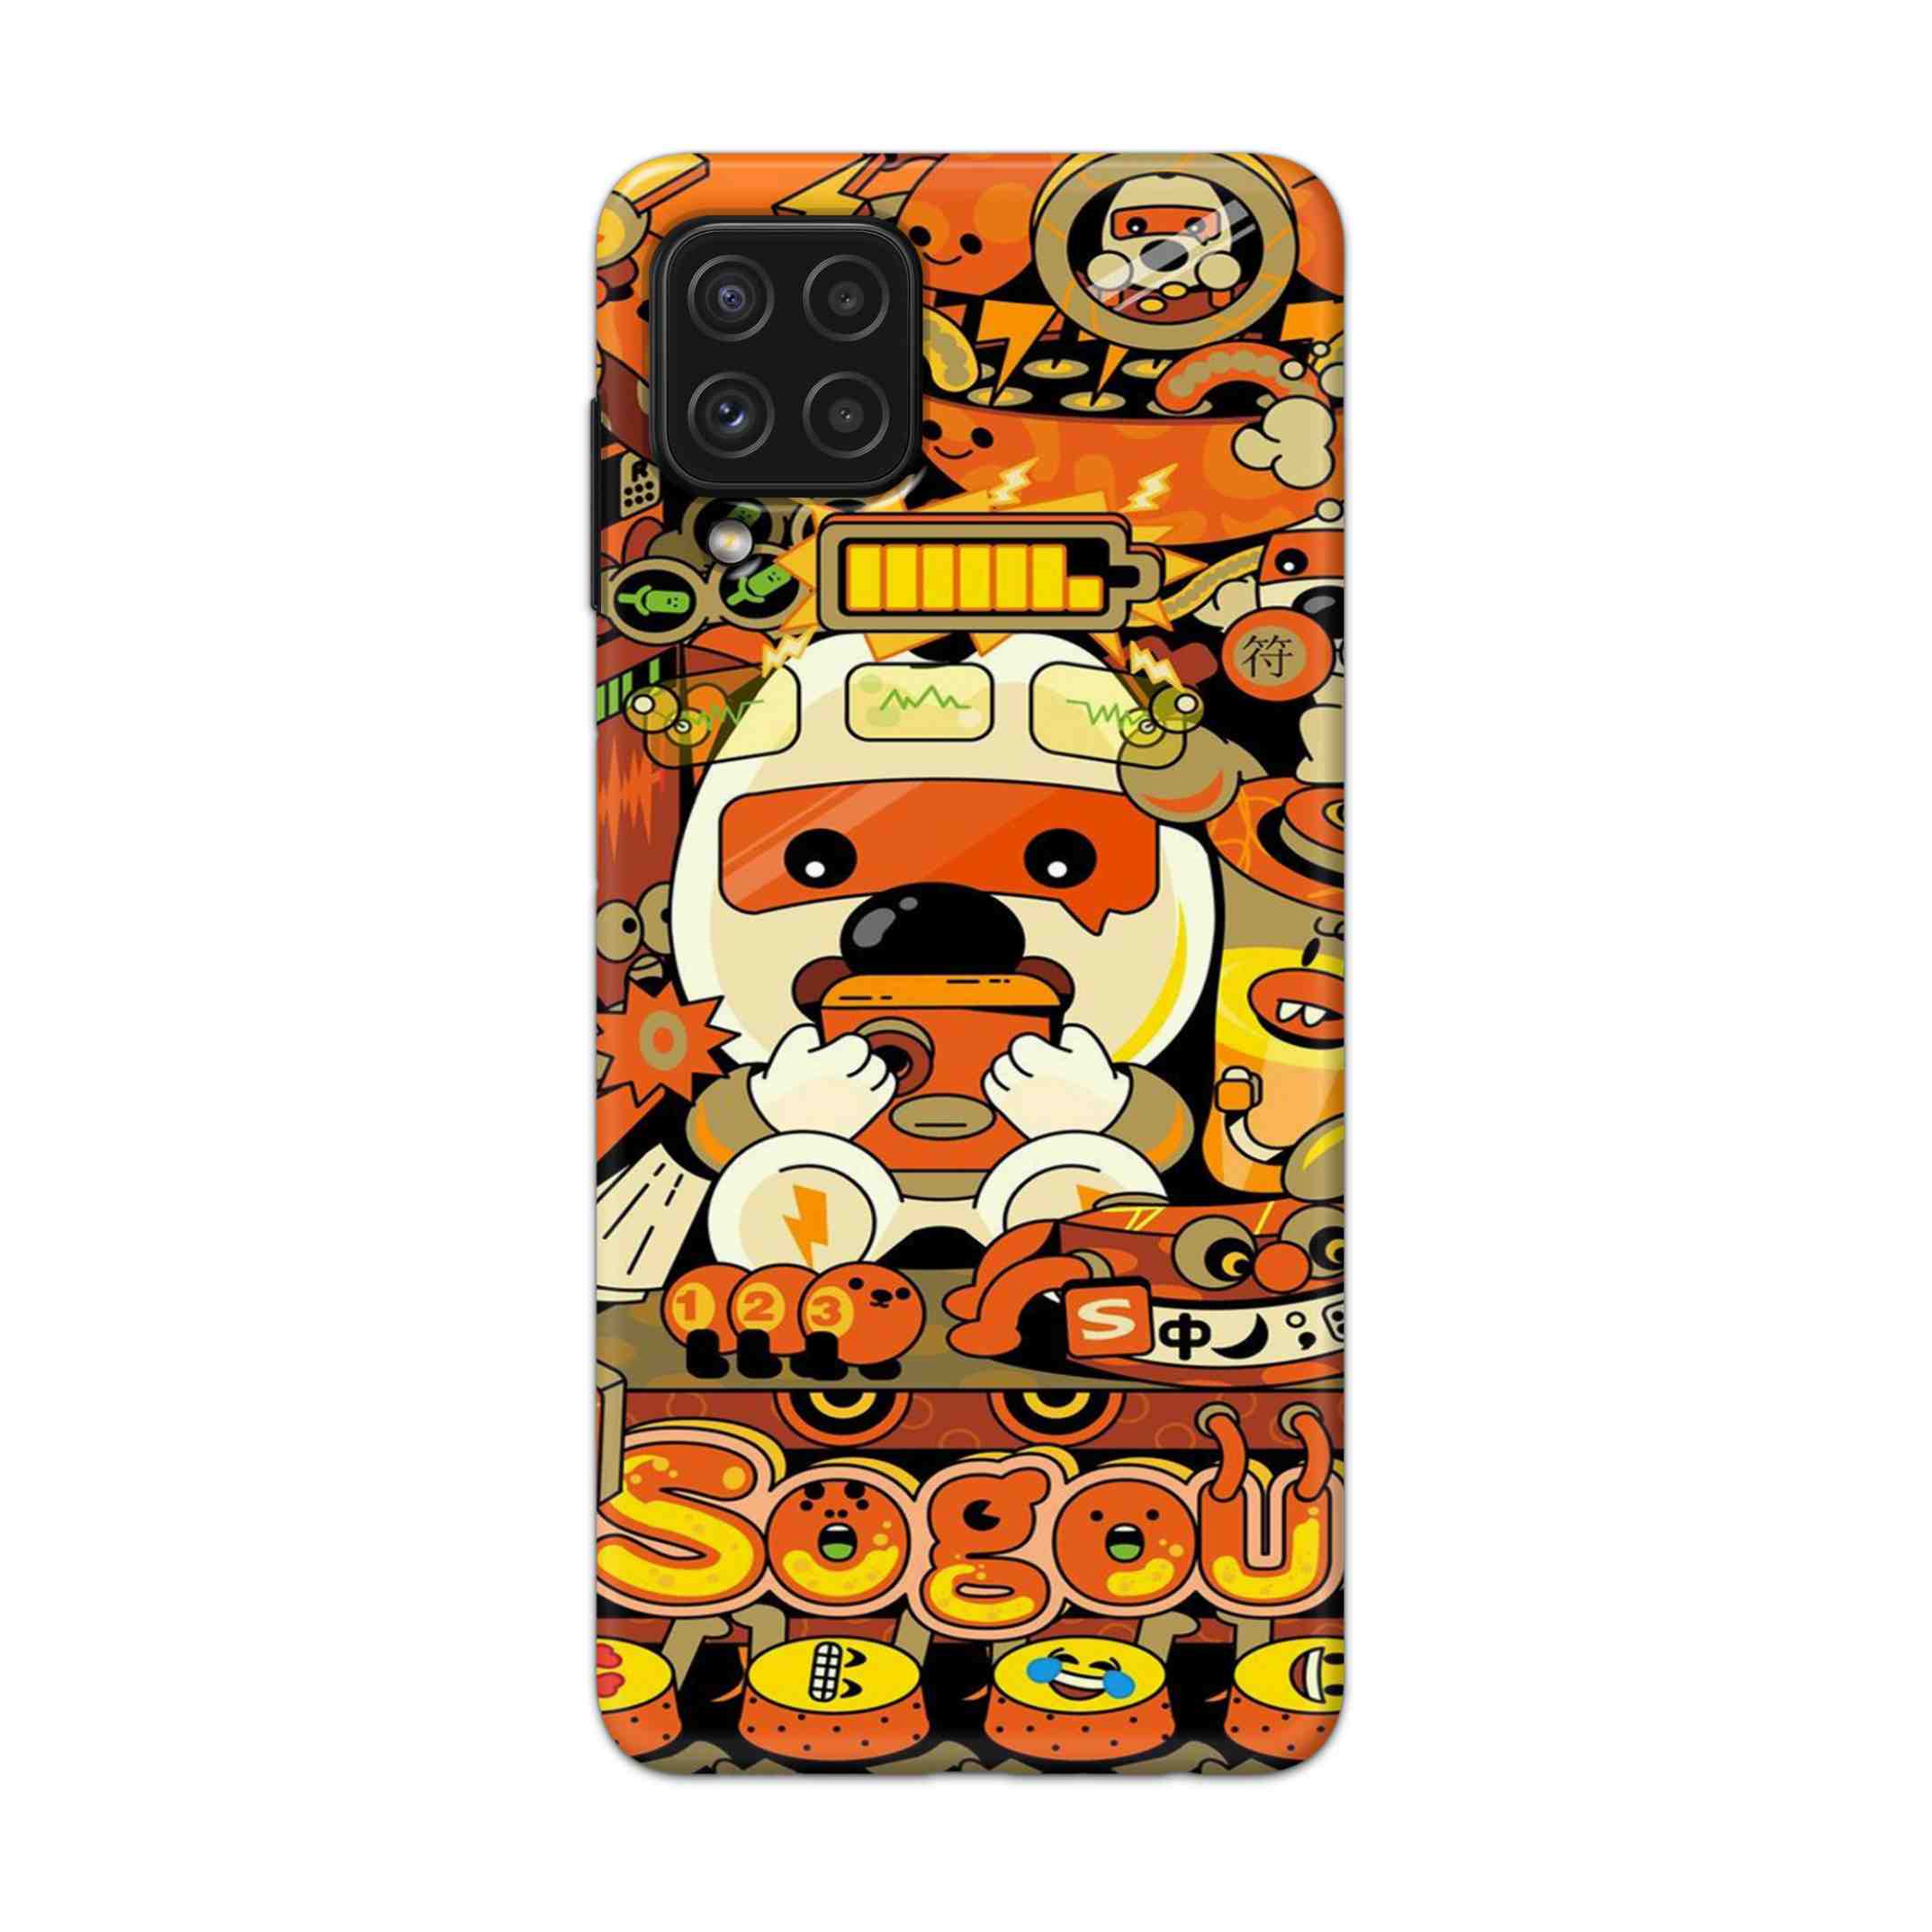 Buy Sogou Hard Back Mobile Phone Case Cover For Samsung Galaxy A22 Online